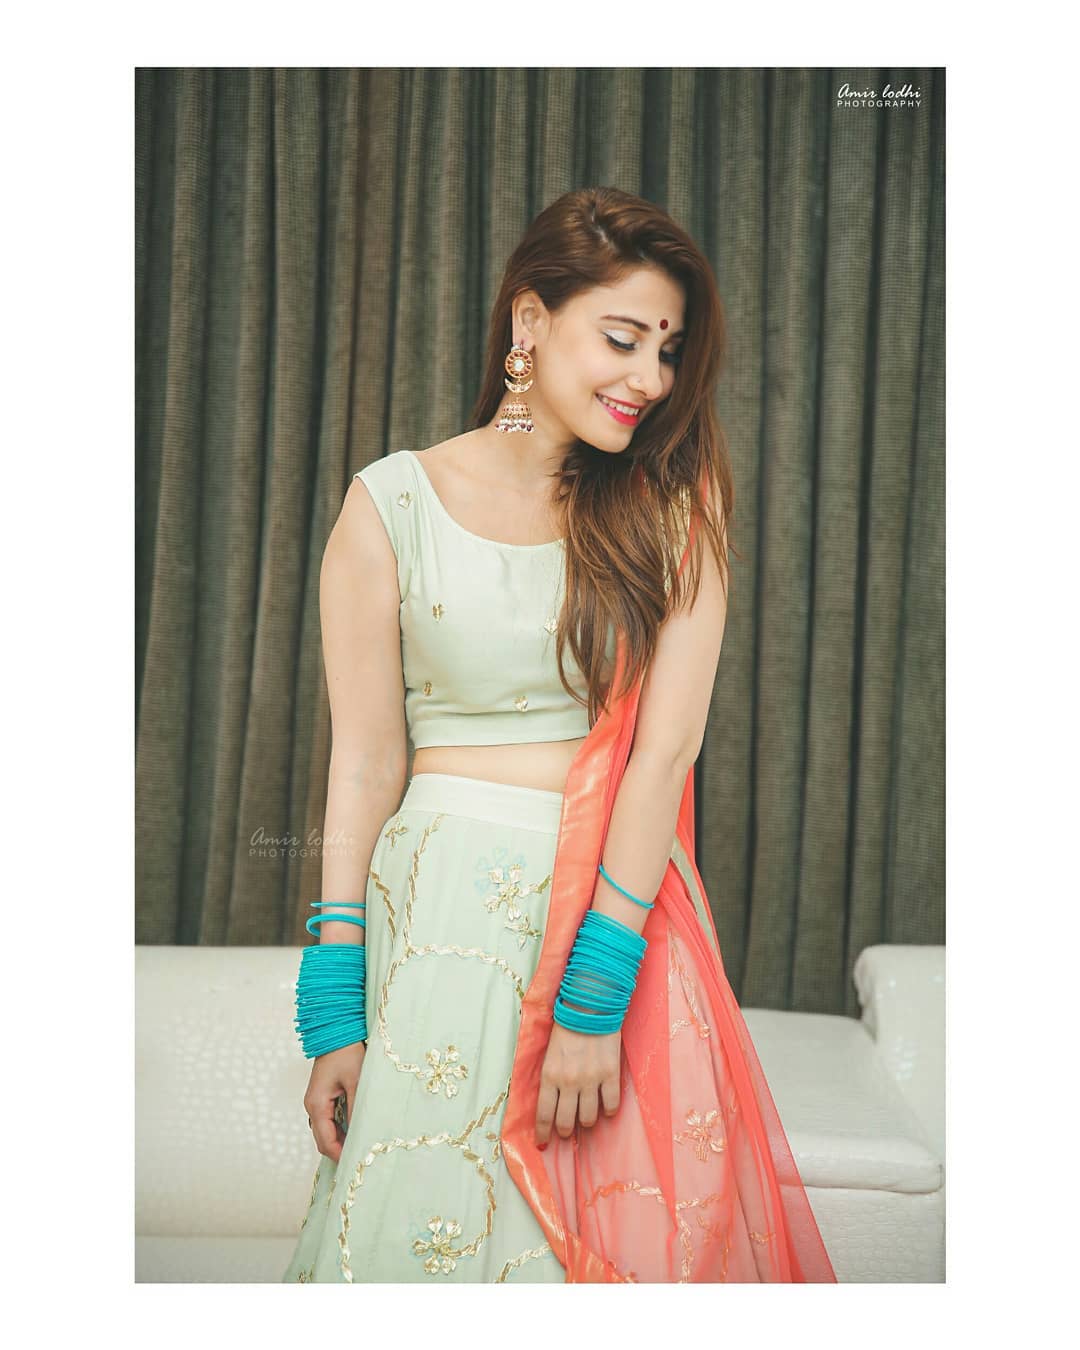 Hina Altaf Looks Stunning in a Recent Family Wedding